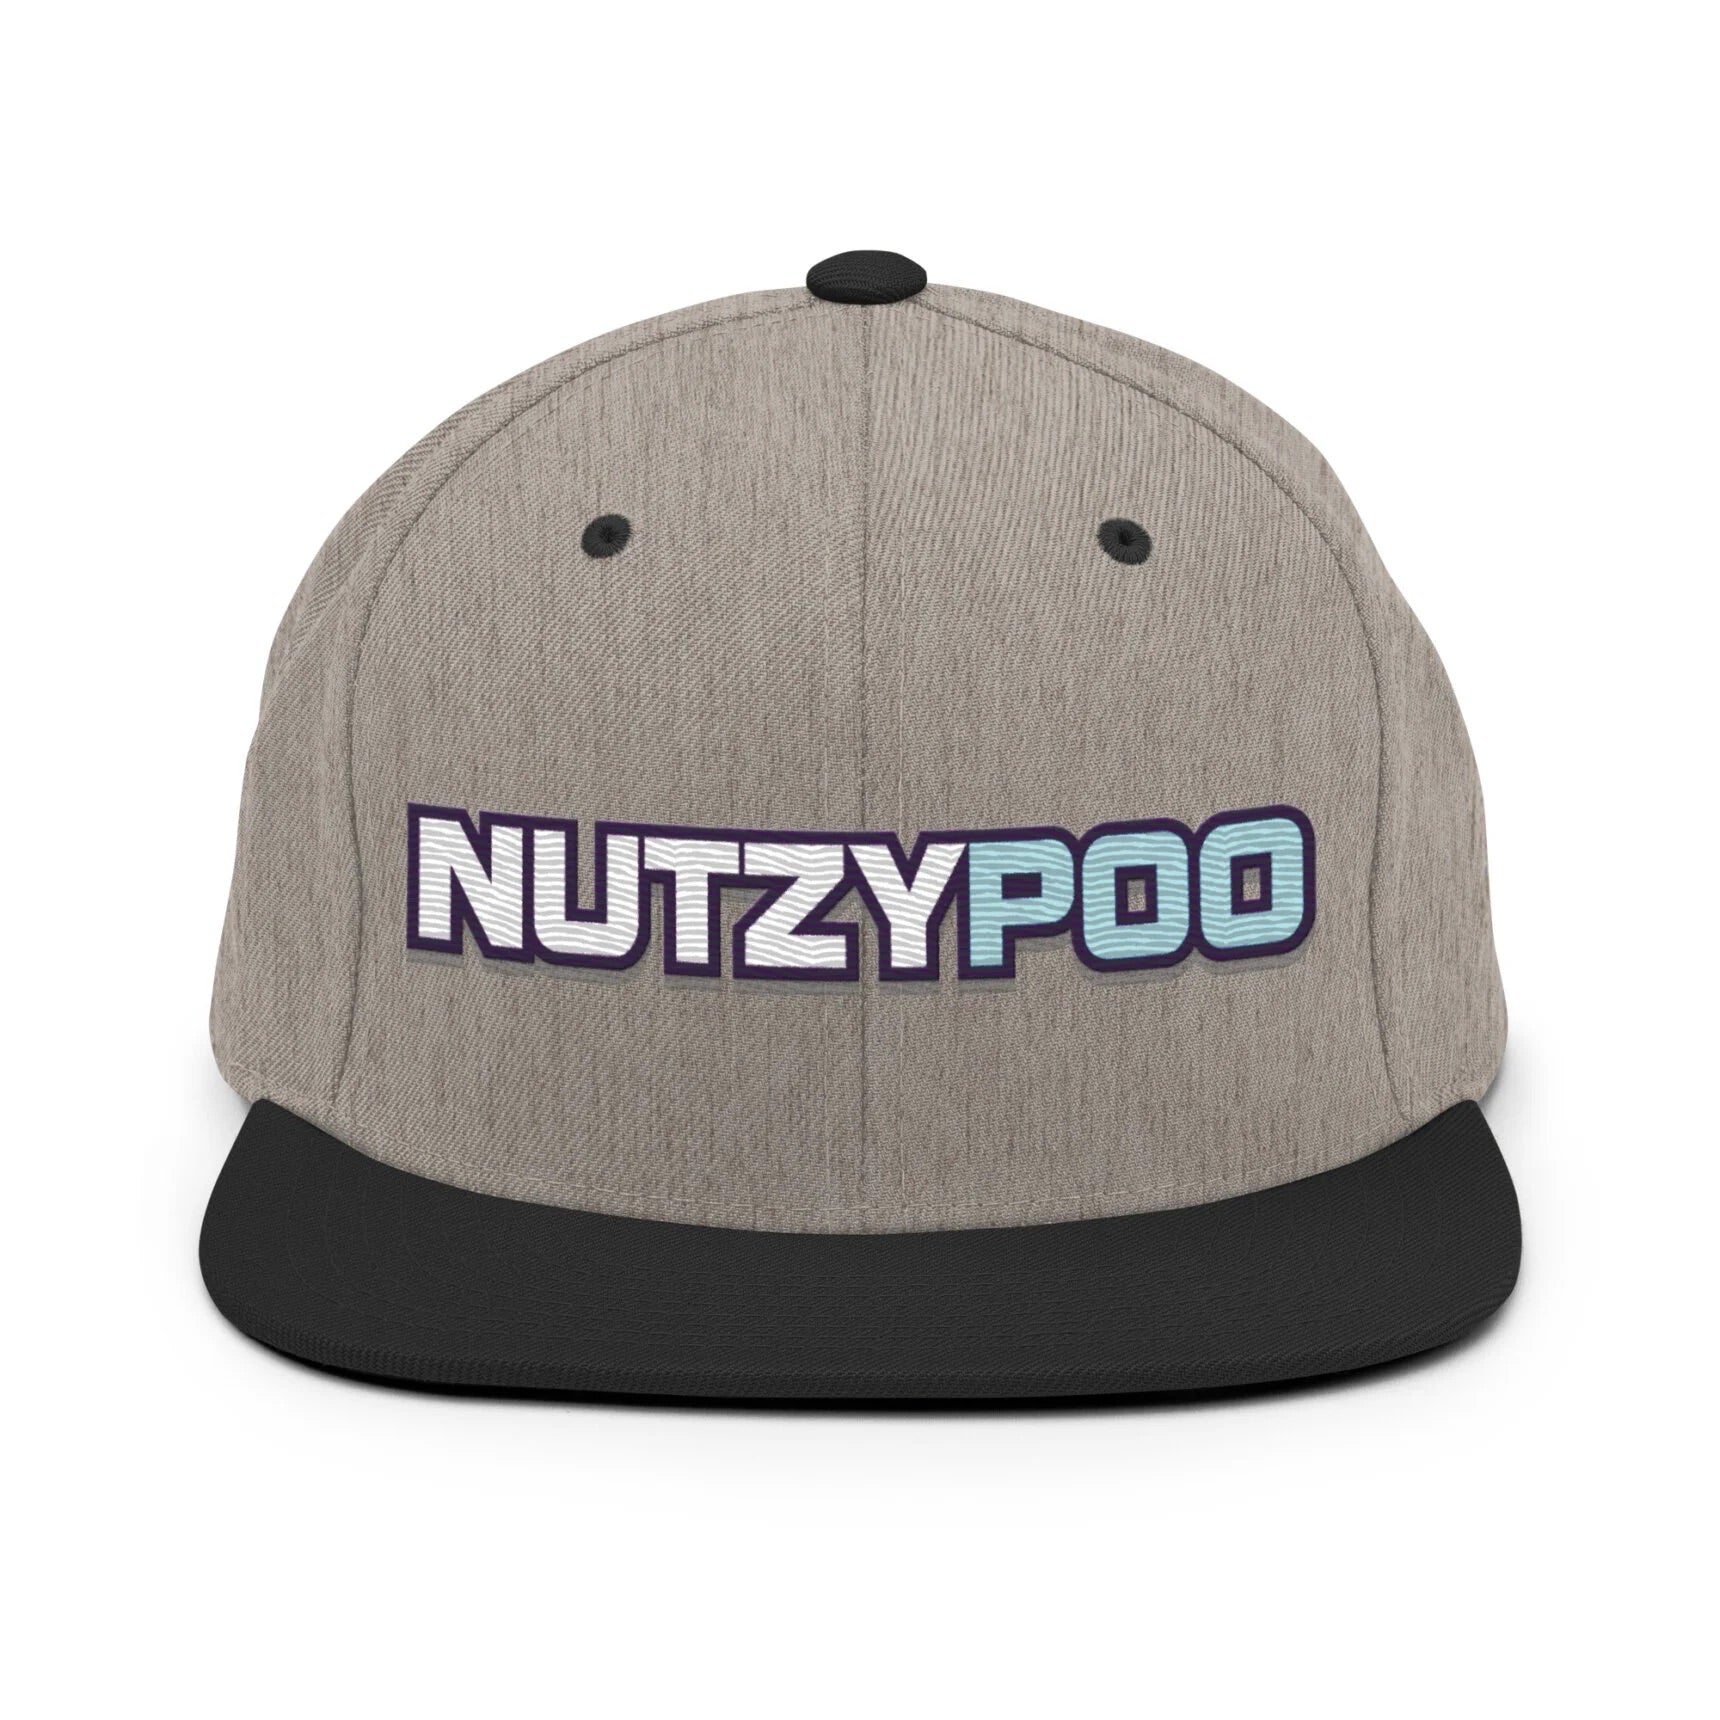 NutzyPoo ShowZone hat in heather grey with black brim and accents